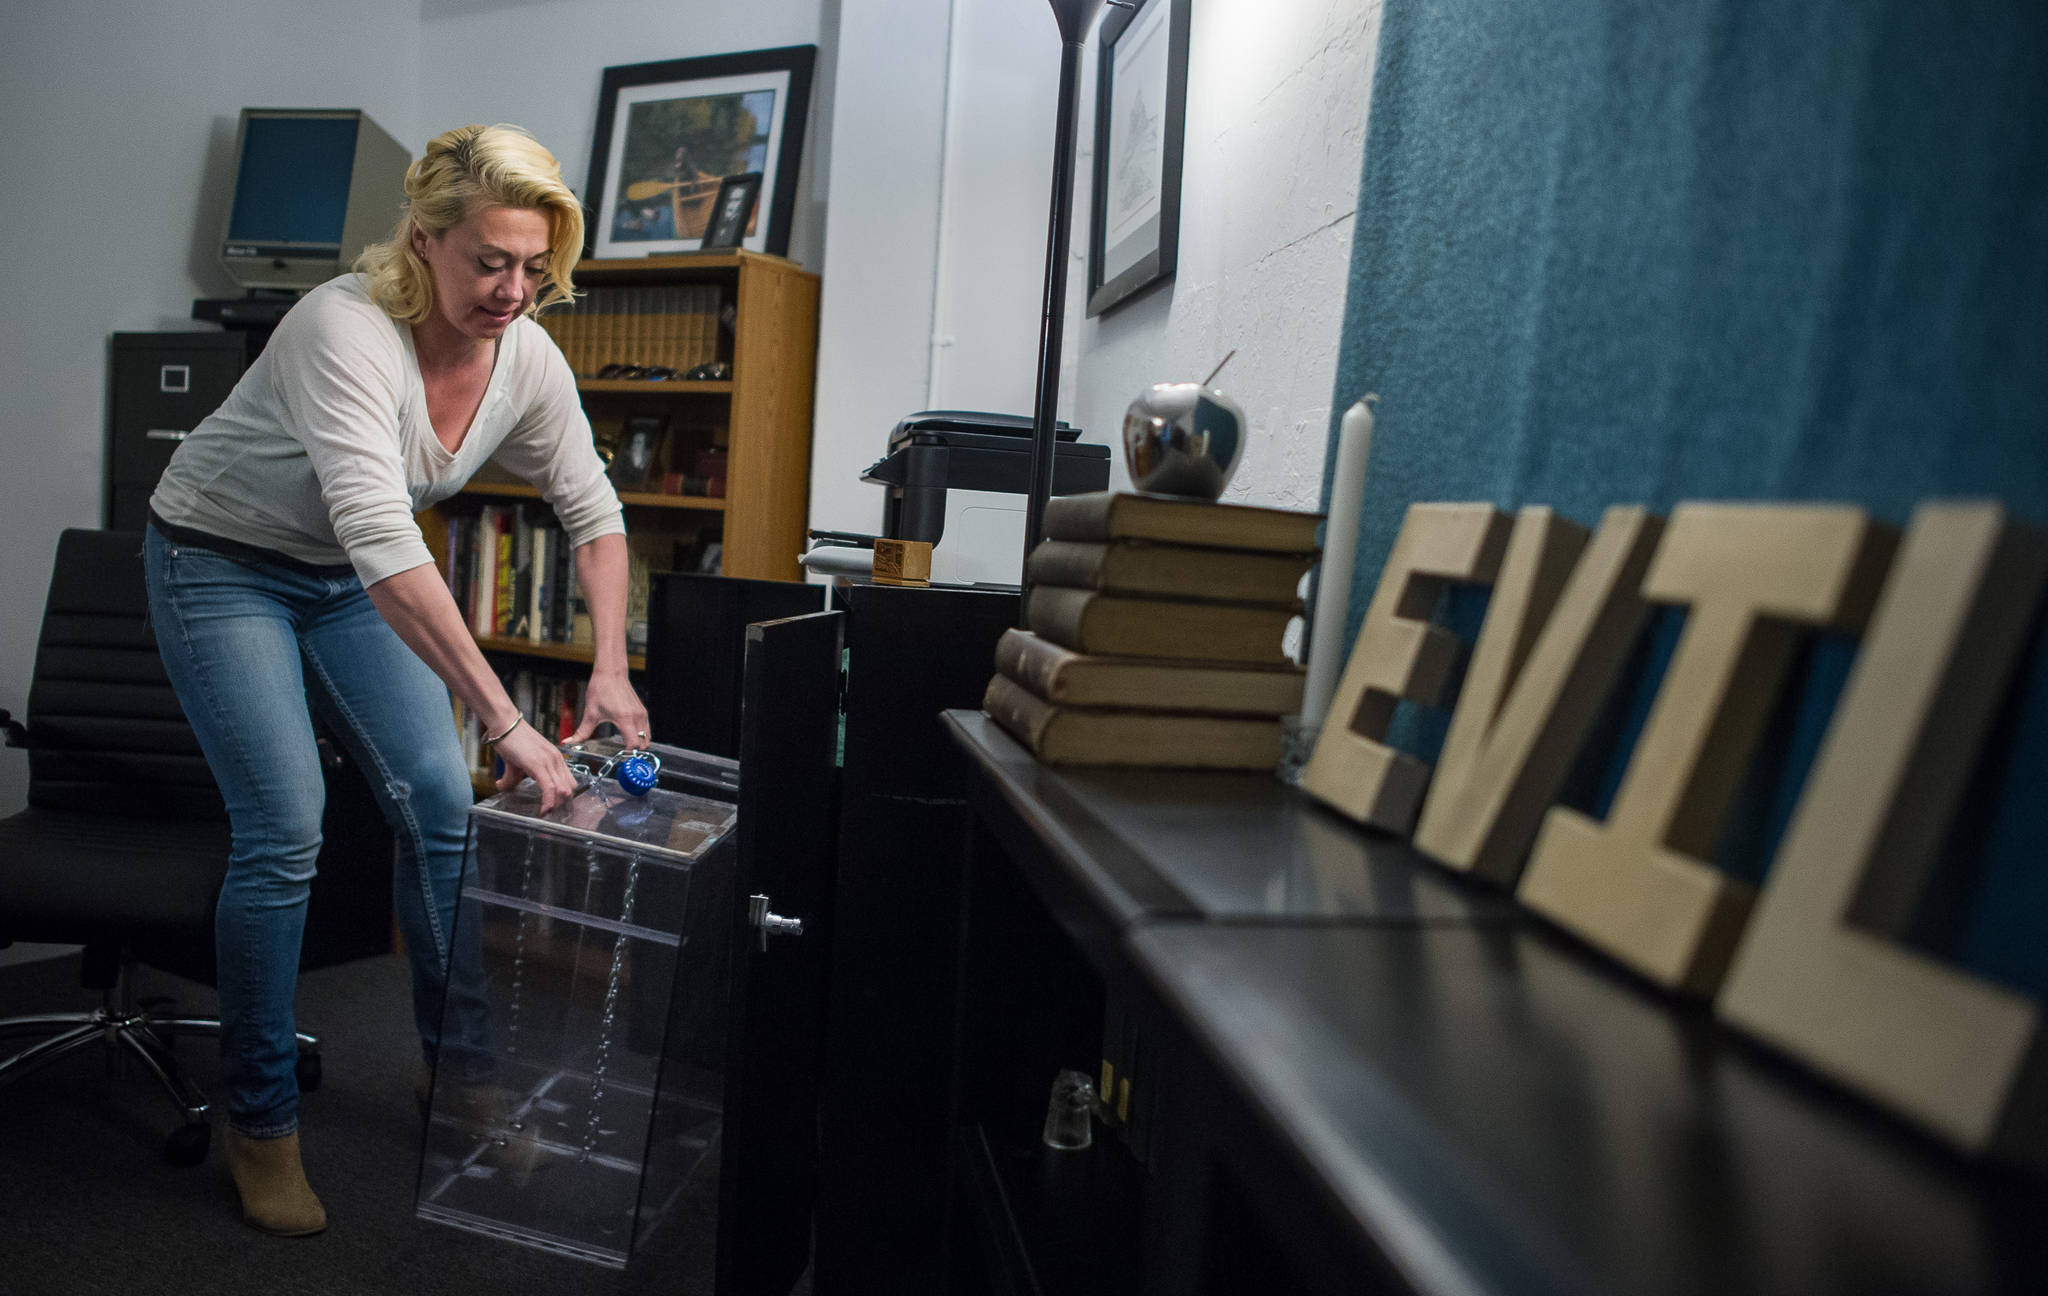 Niki Skeek-Wheeland shows off her Espionage Room at her new business, Escape Game Alaska, on Monday, August, 7, 2017. The business will be the first escape room in Southeast Alaska. Skeek-Wheeland is planning to open next month. (Michael Penn | Juneau Empire)